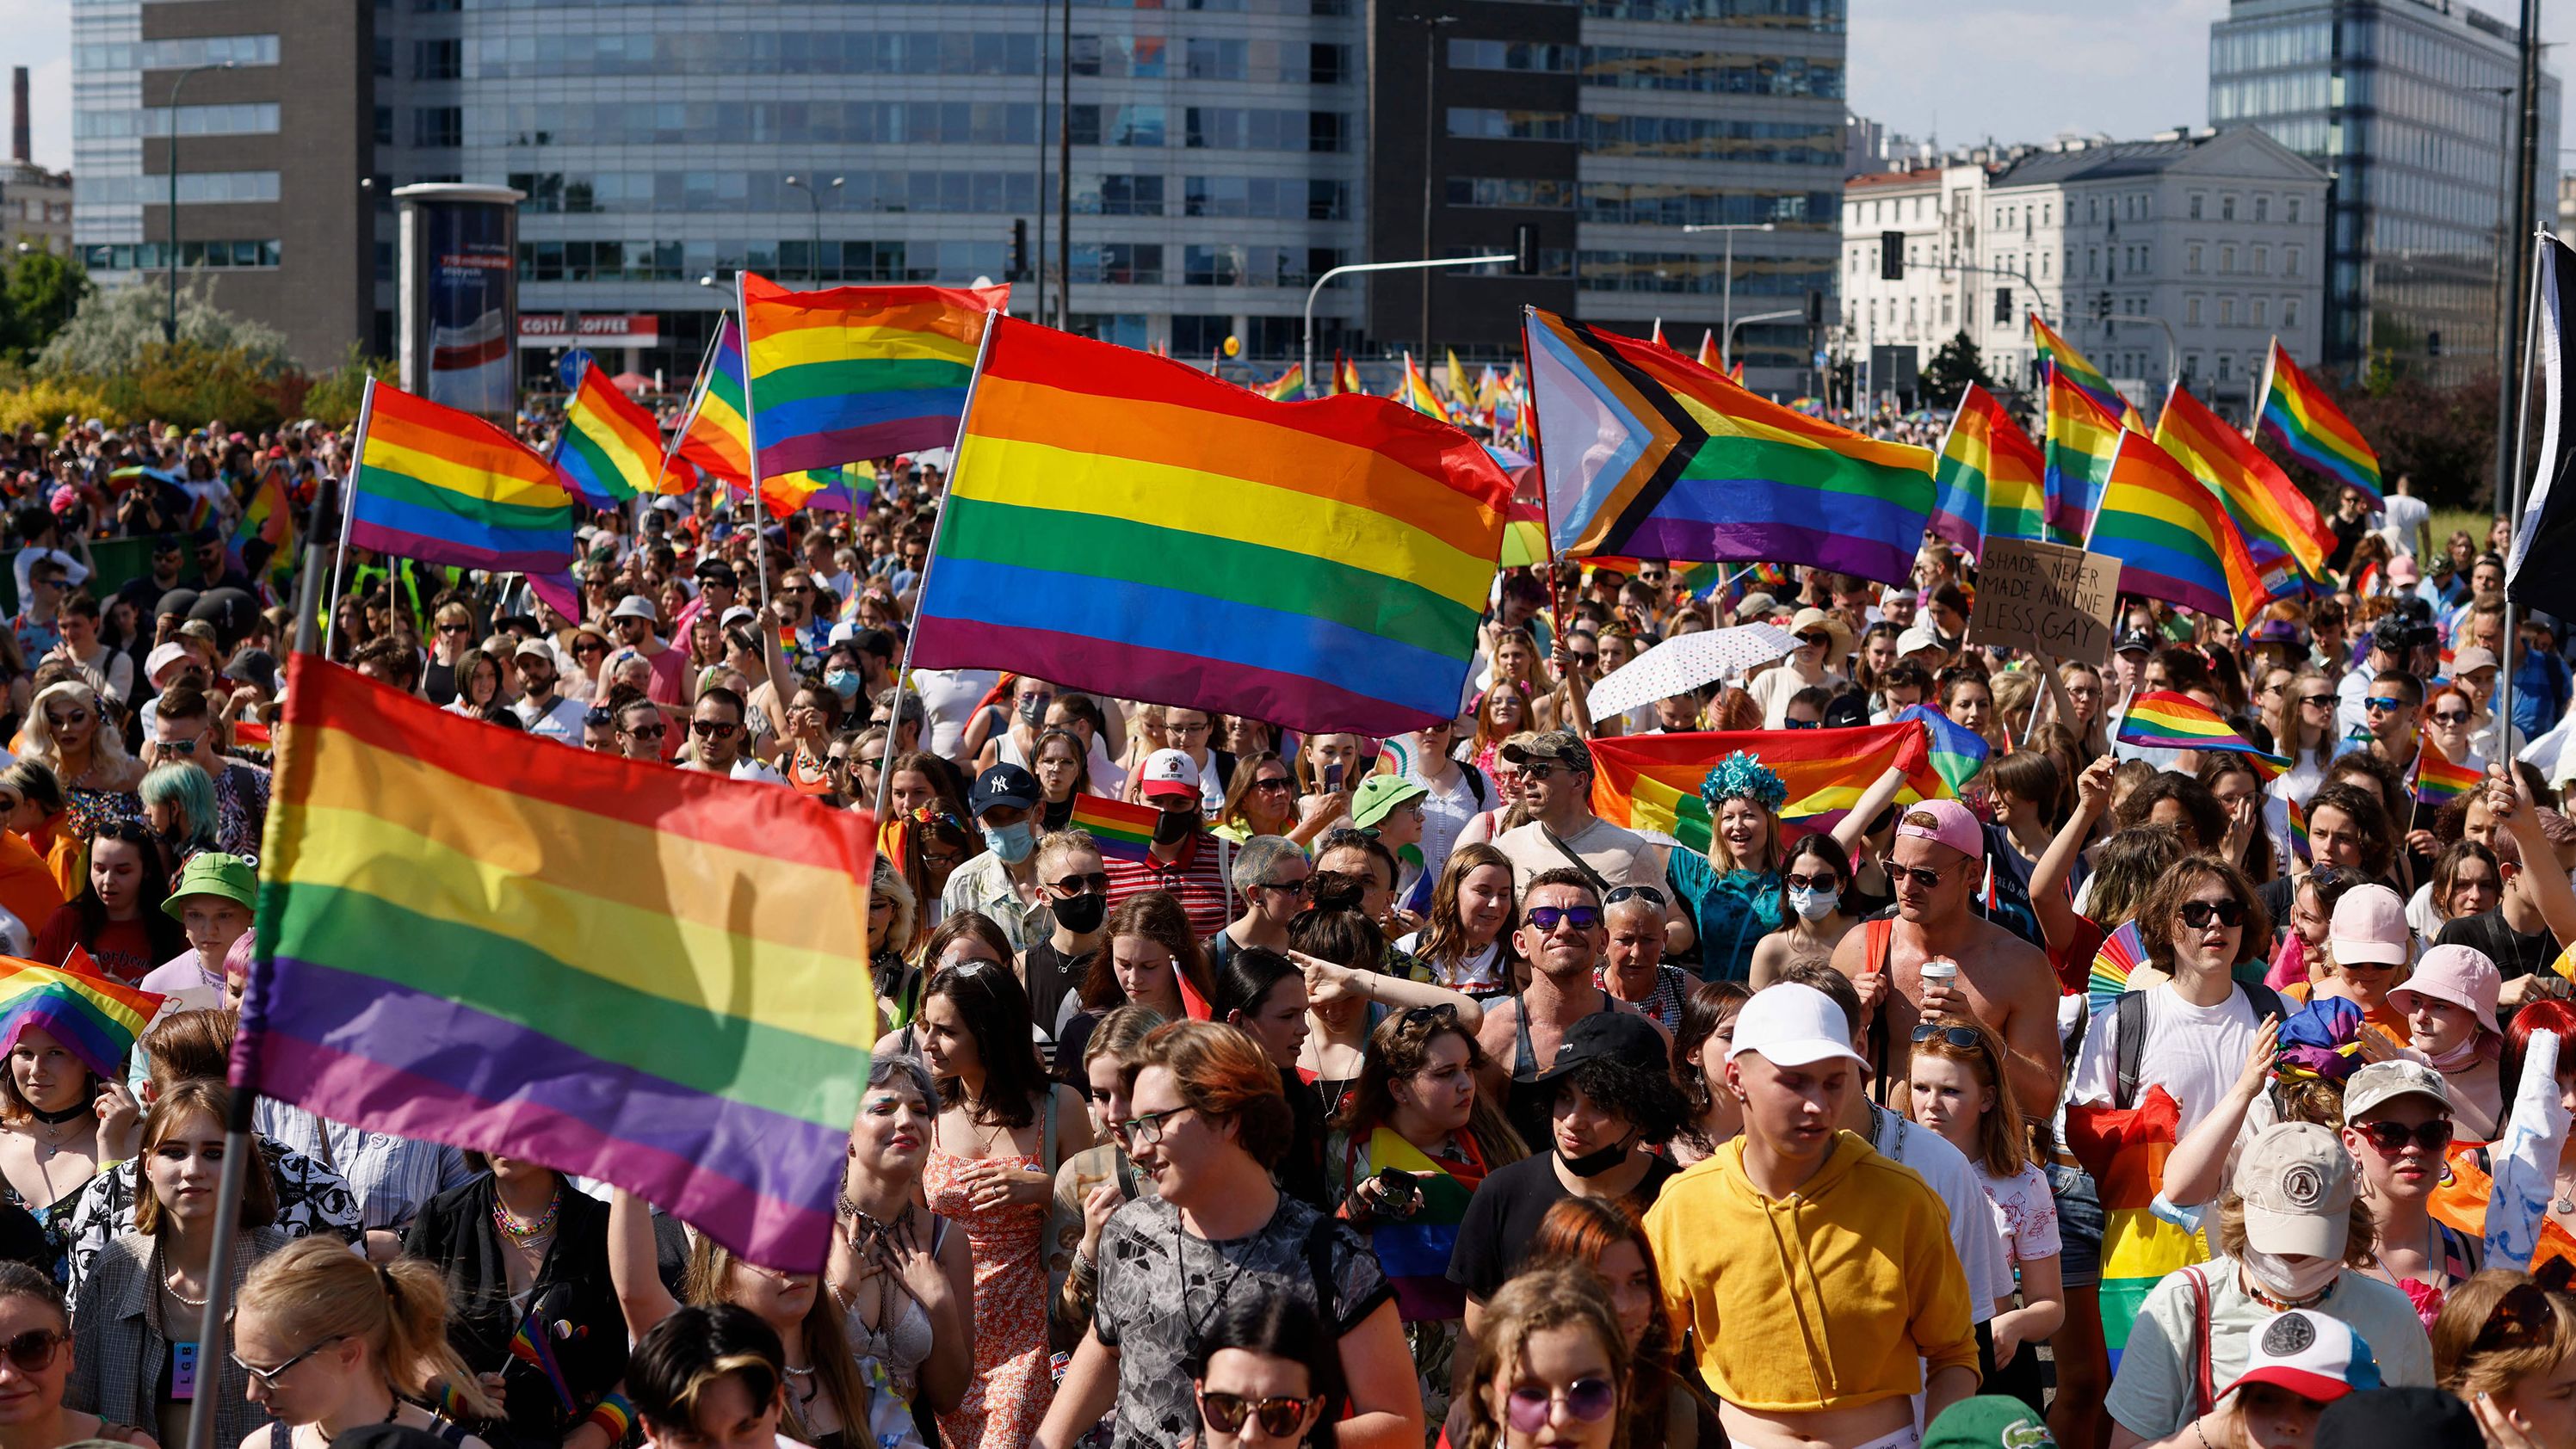 People march during the Warsaw Pride parade in Poland on June 19.